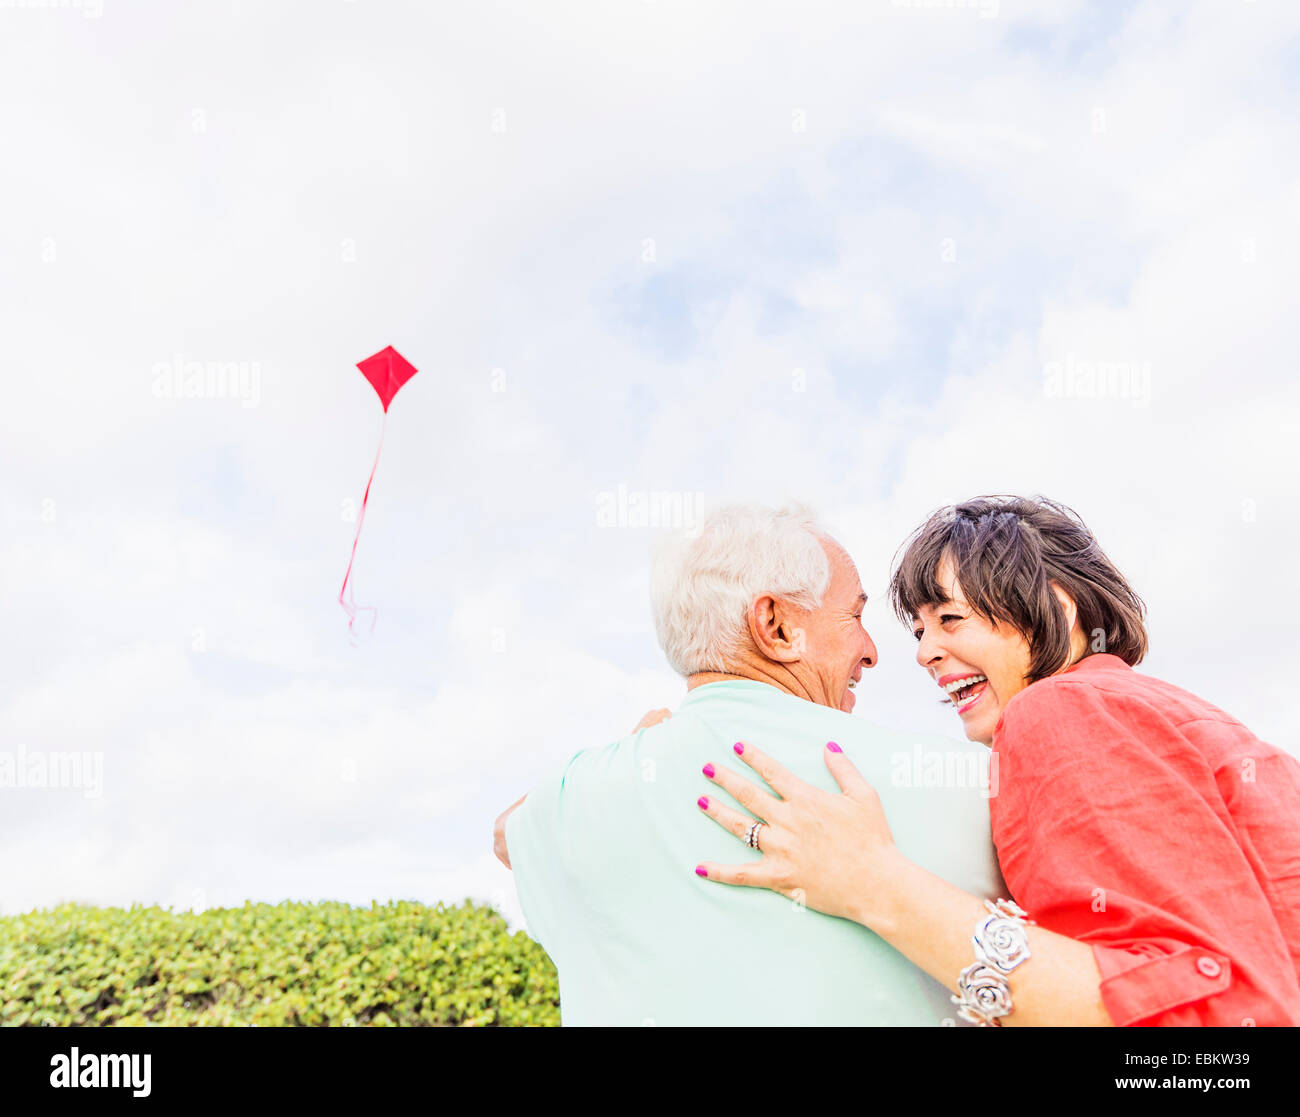 Faible angle view of couple flying kite ensemble Banque D'Images